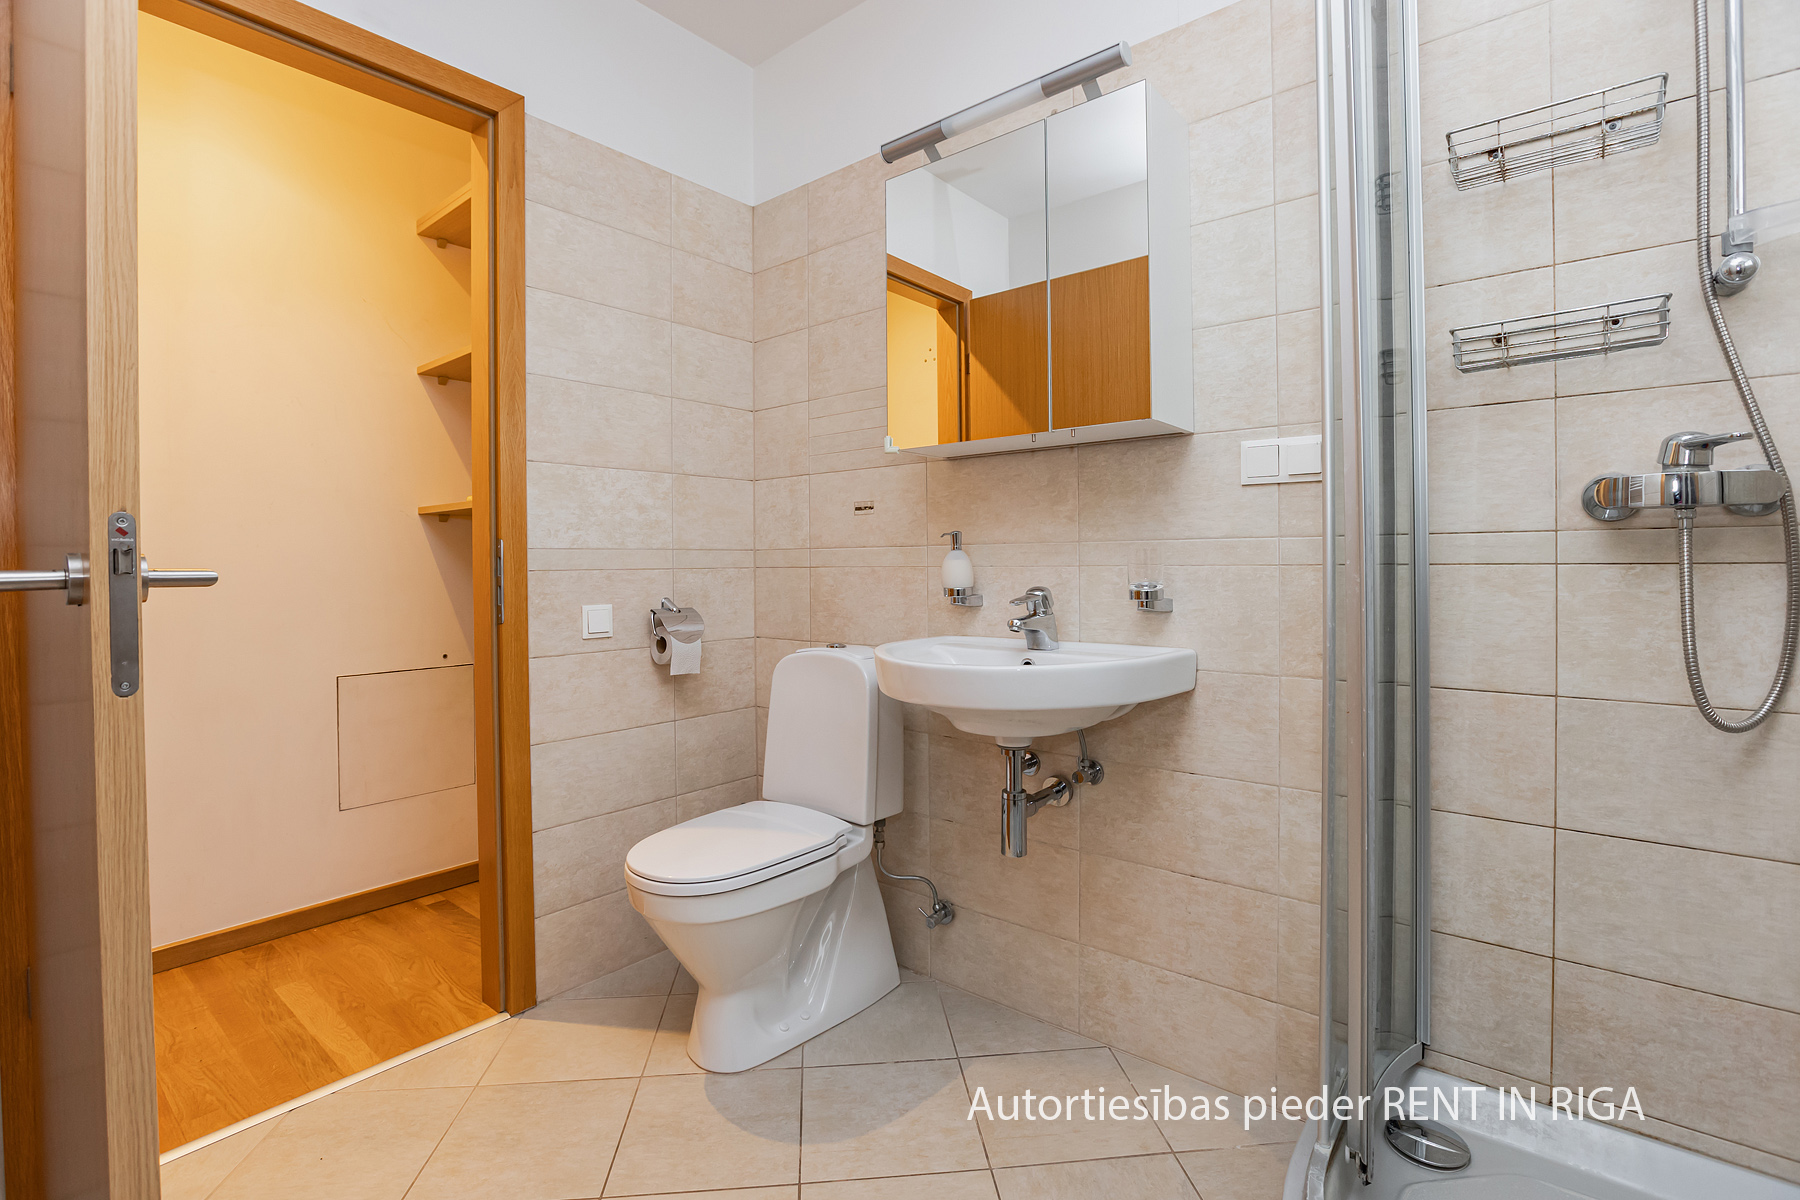 Apartment for rent, Skanstes street 29A - Image 1